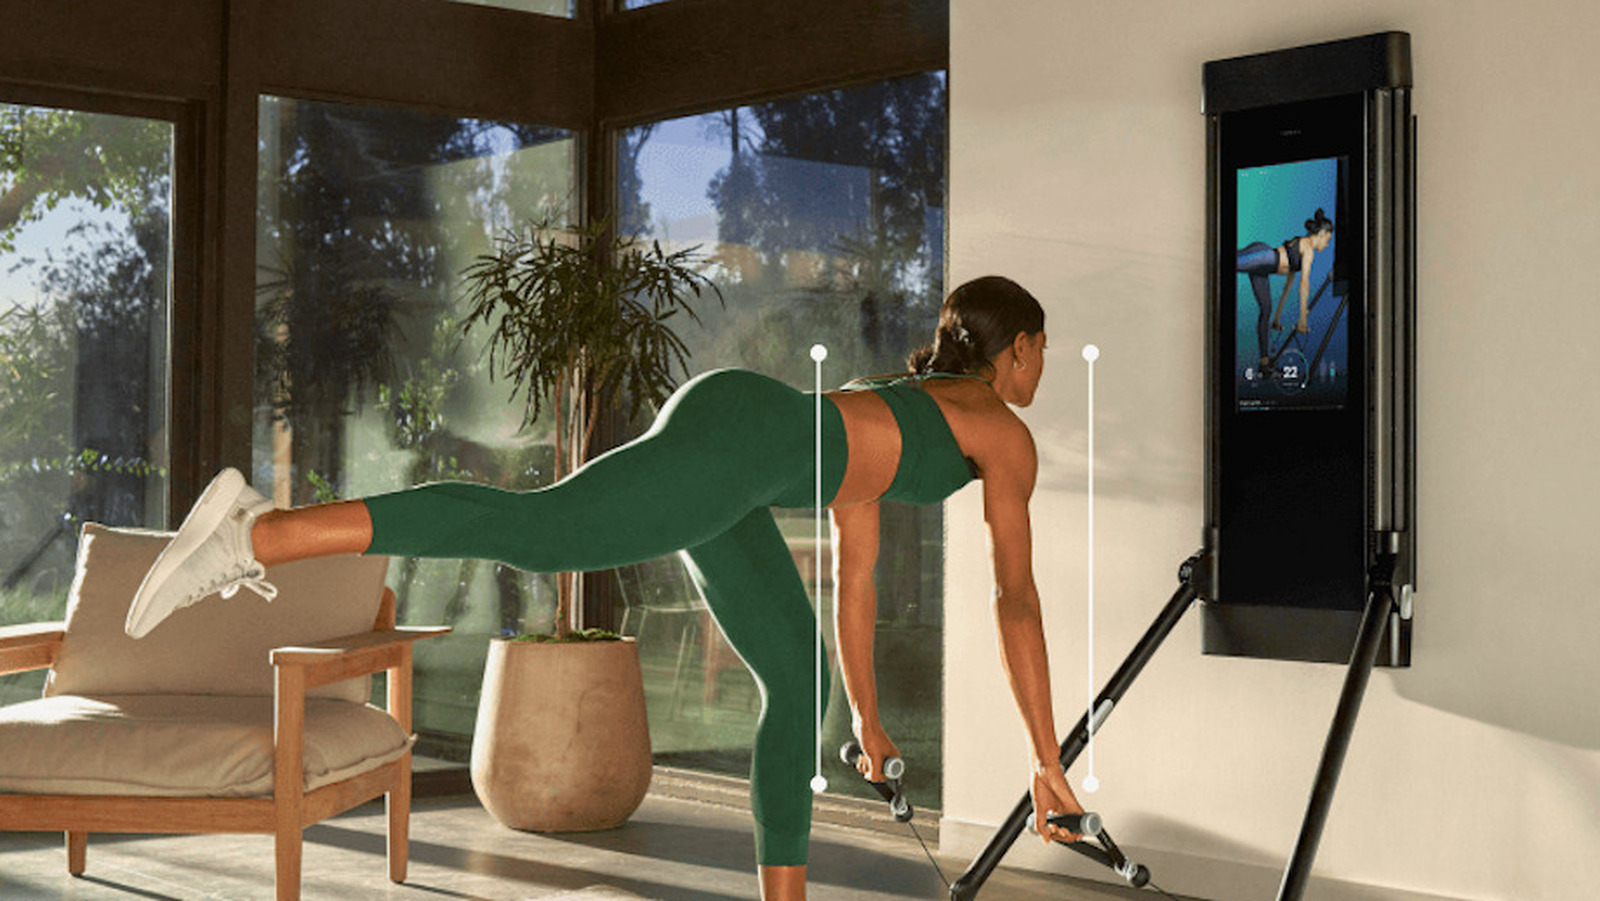 Tonal is a Touch Screen Smart Gym You Mount on the Wall – Robb Report